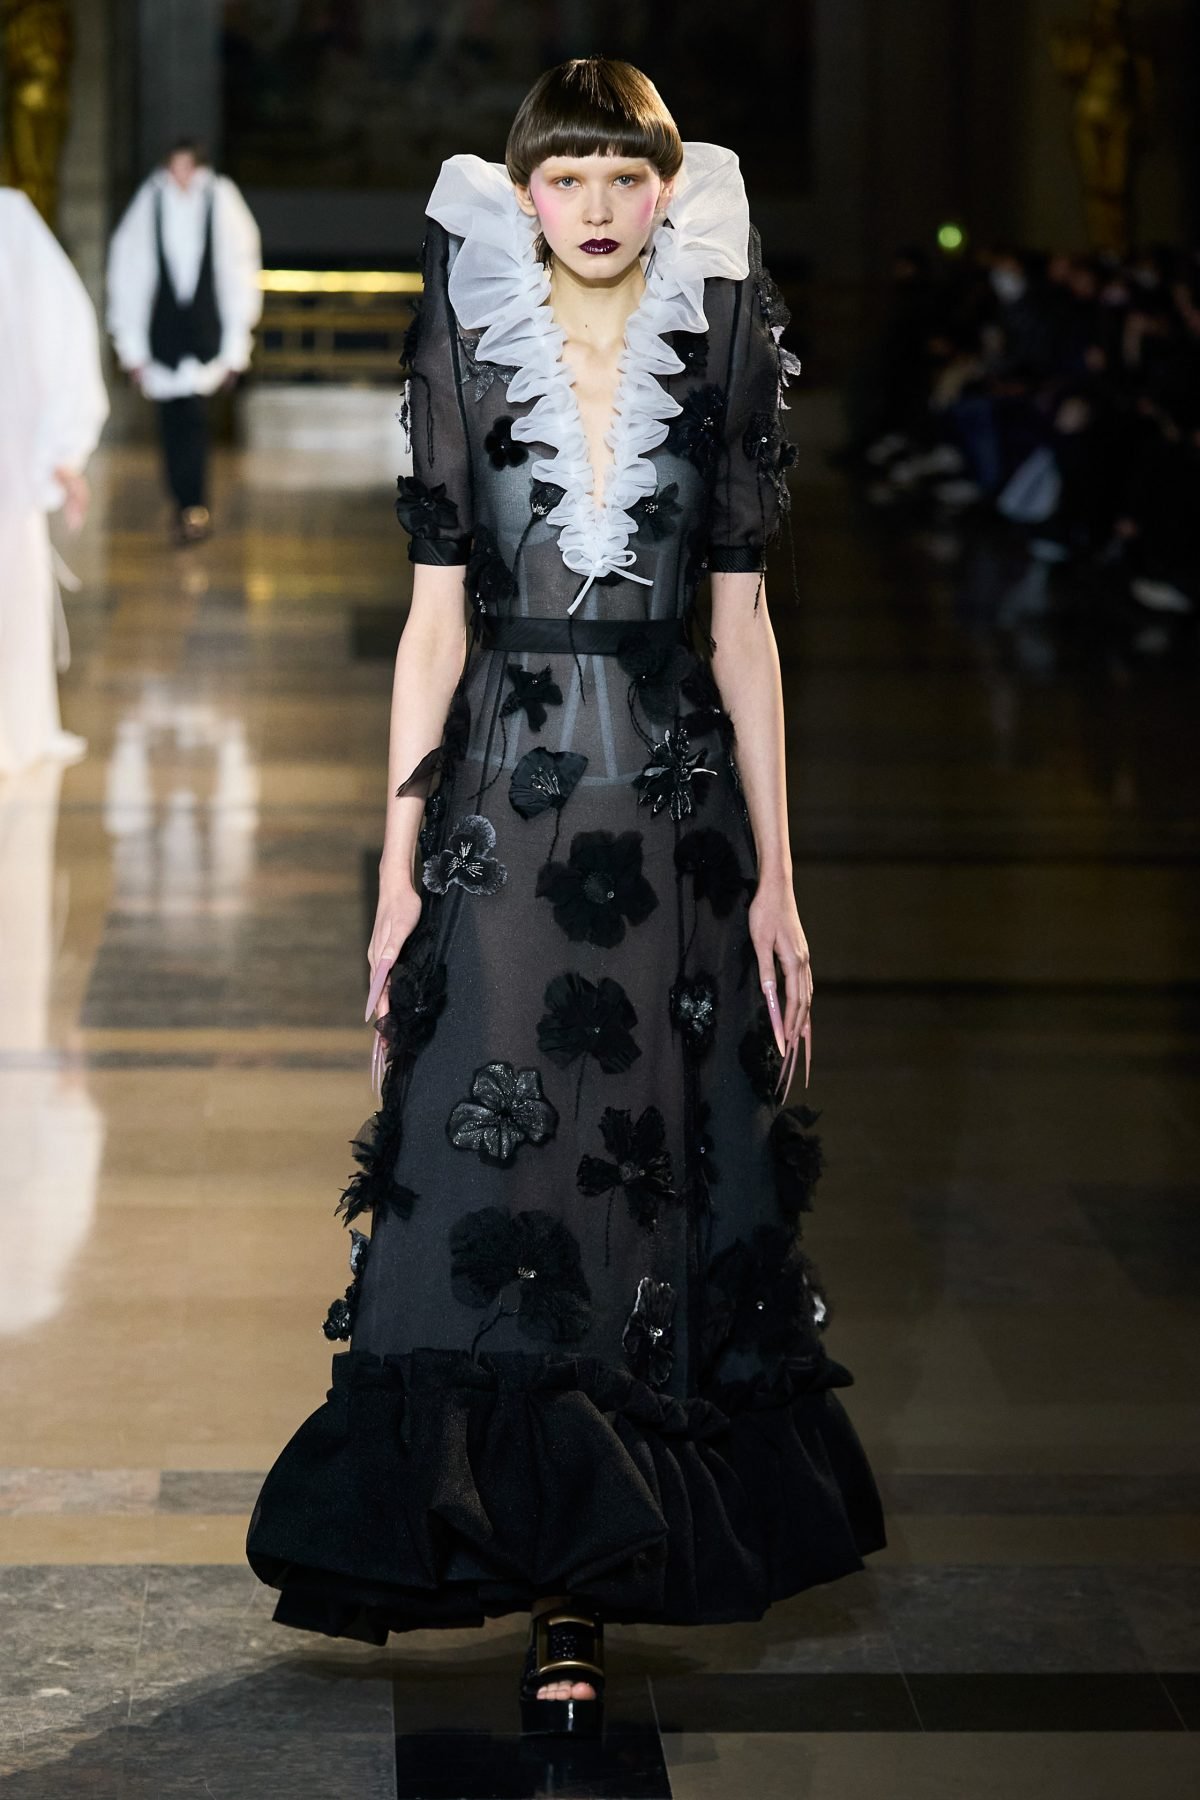 00023-Viktor-and-Rolf-Spring-22-Couture-credit-Alessandro-Lucioni-Gorunway-1-1200x1800.jpeg